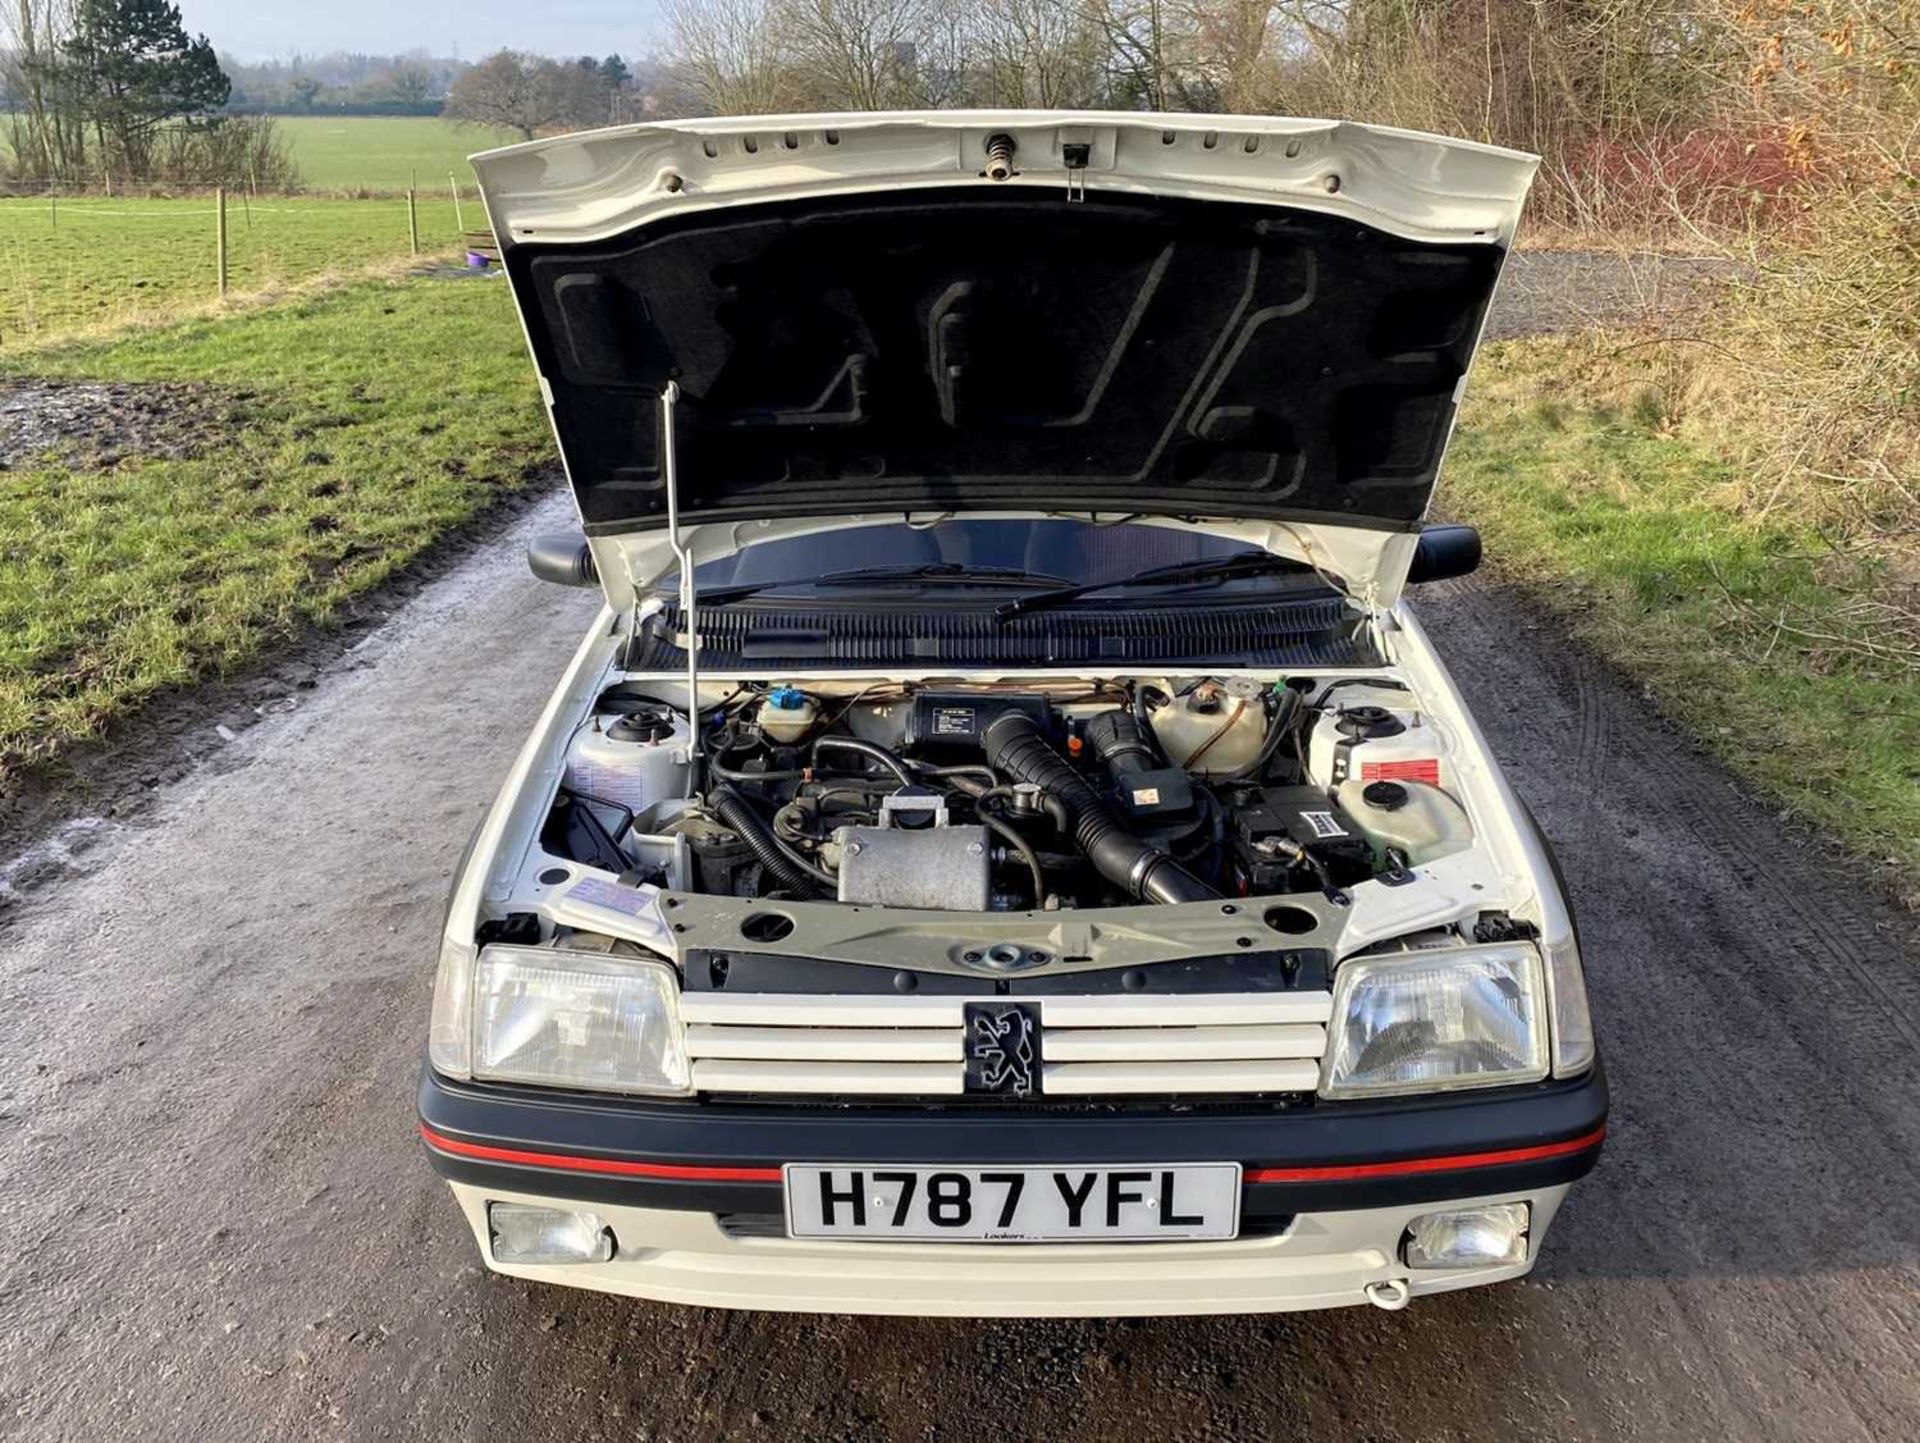 1990 Peugeot 205 GTi 1.6 Only 56,000 miles, same owner for 16 years - Image 14 of 81